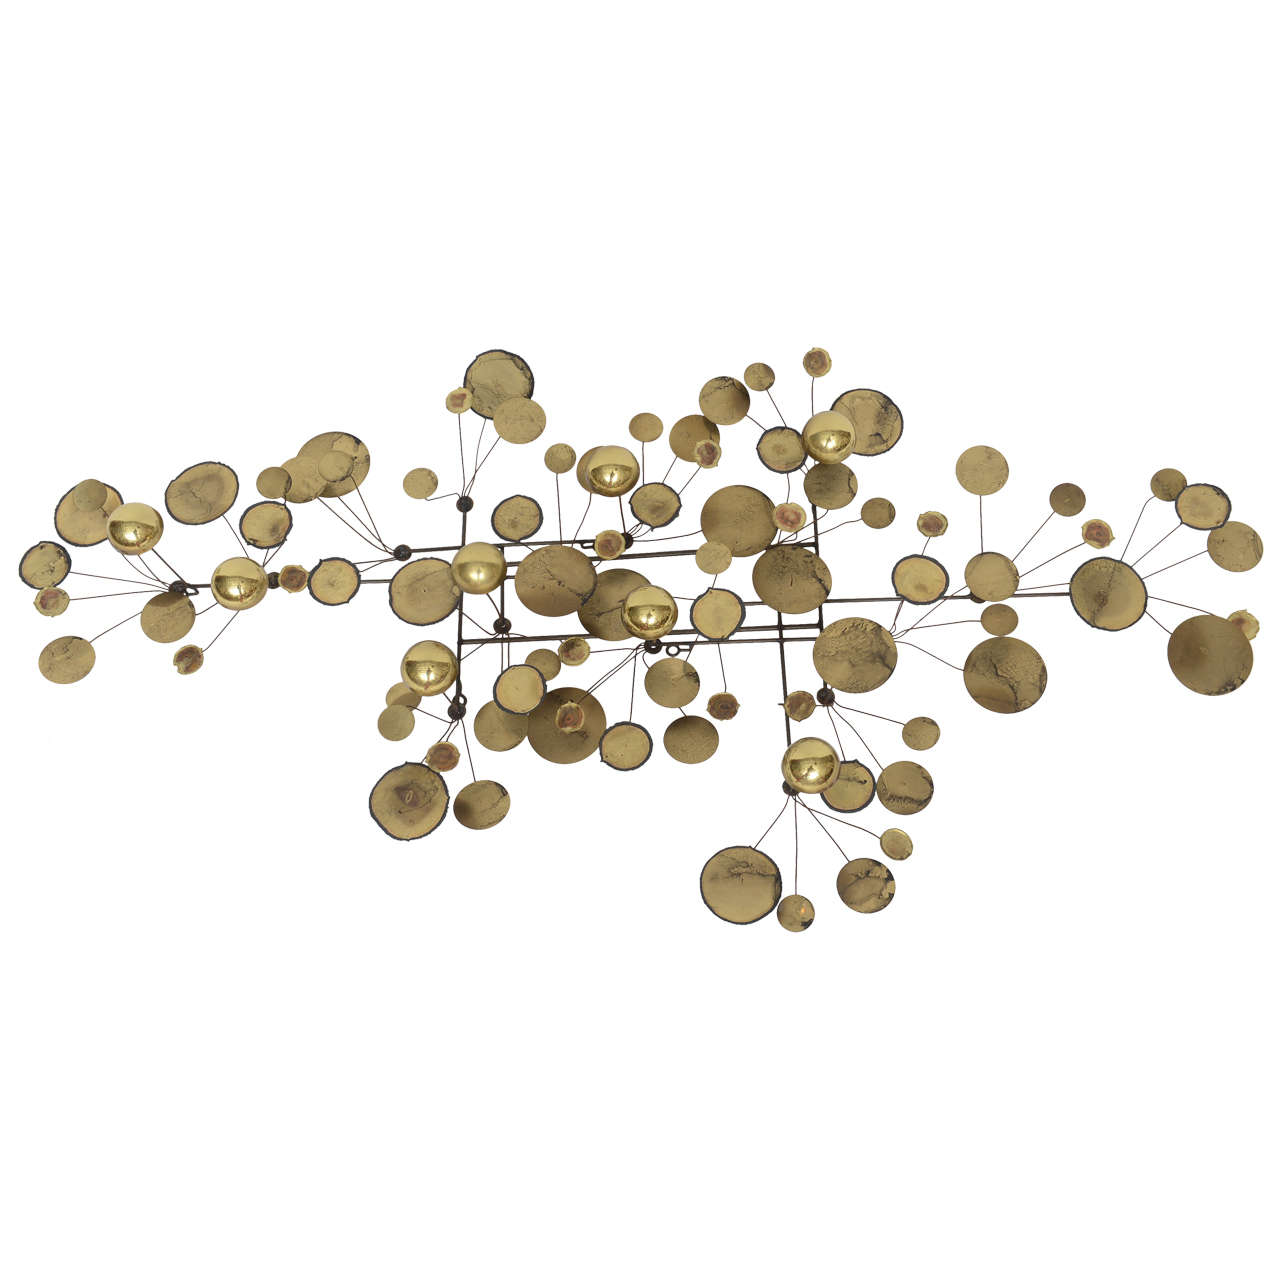 Brass Raindrops Wall Sculpture by C. Jere, Manufactured by Artisan House